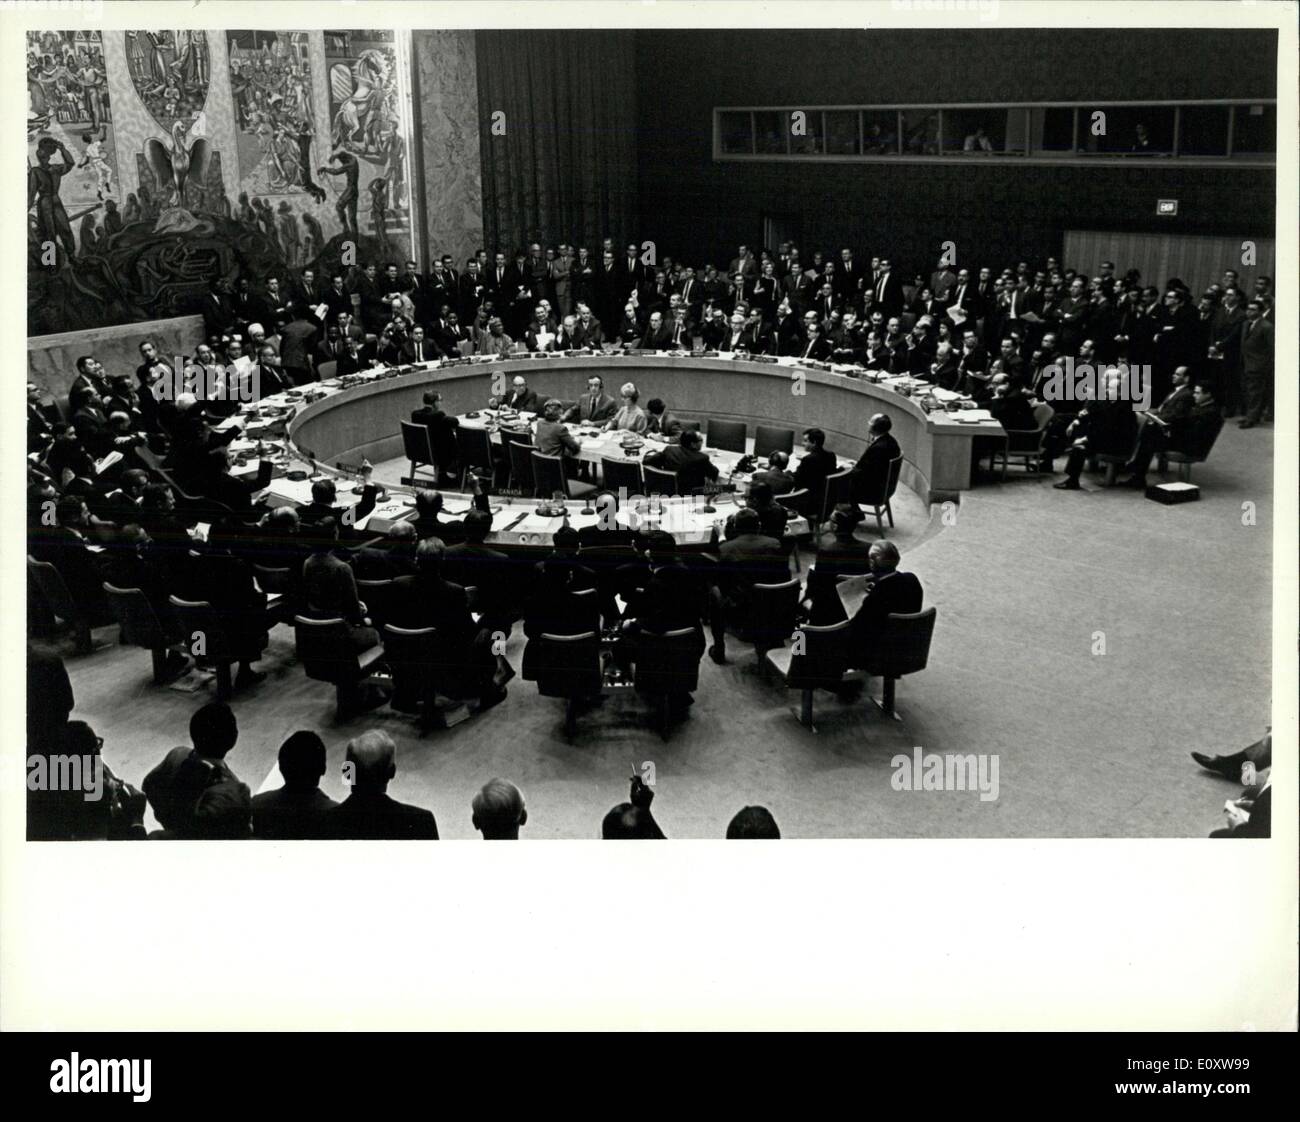 Nov. 22, 1967 - Security Council adopts resolution on Middle East. United Nations, New York. 22 November 1967 ? The Security Council today unanimously adopted a resolution affirming that the establishment of a just and lasting peace in the Middle East should include the application of the following principles: (1) Withdrawal of Israeli armed forces from territories occupied in the recent conflict; and (2) Termination of all claims or states of belligerency and respect for an acknowledgment of the sovereignty, territorial integrity and political independence of every state in the area and Stock Photo